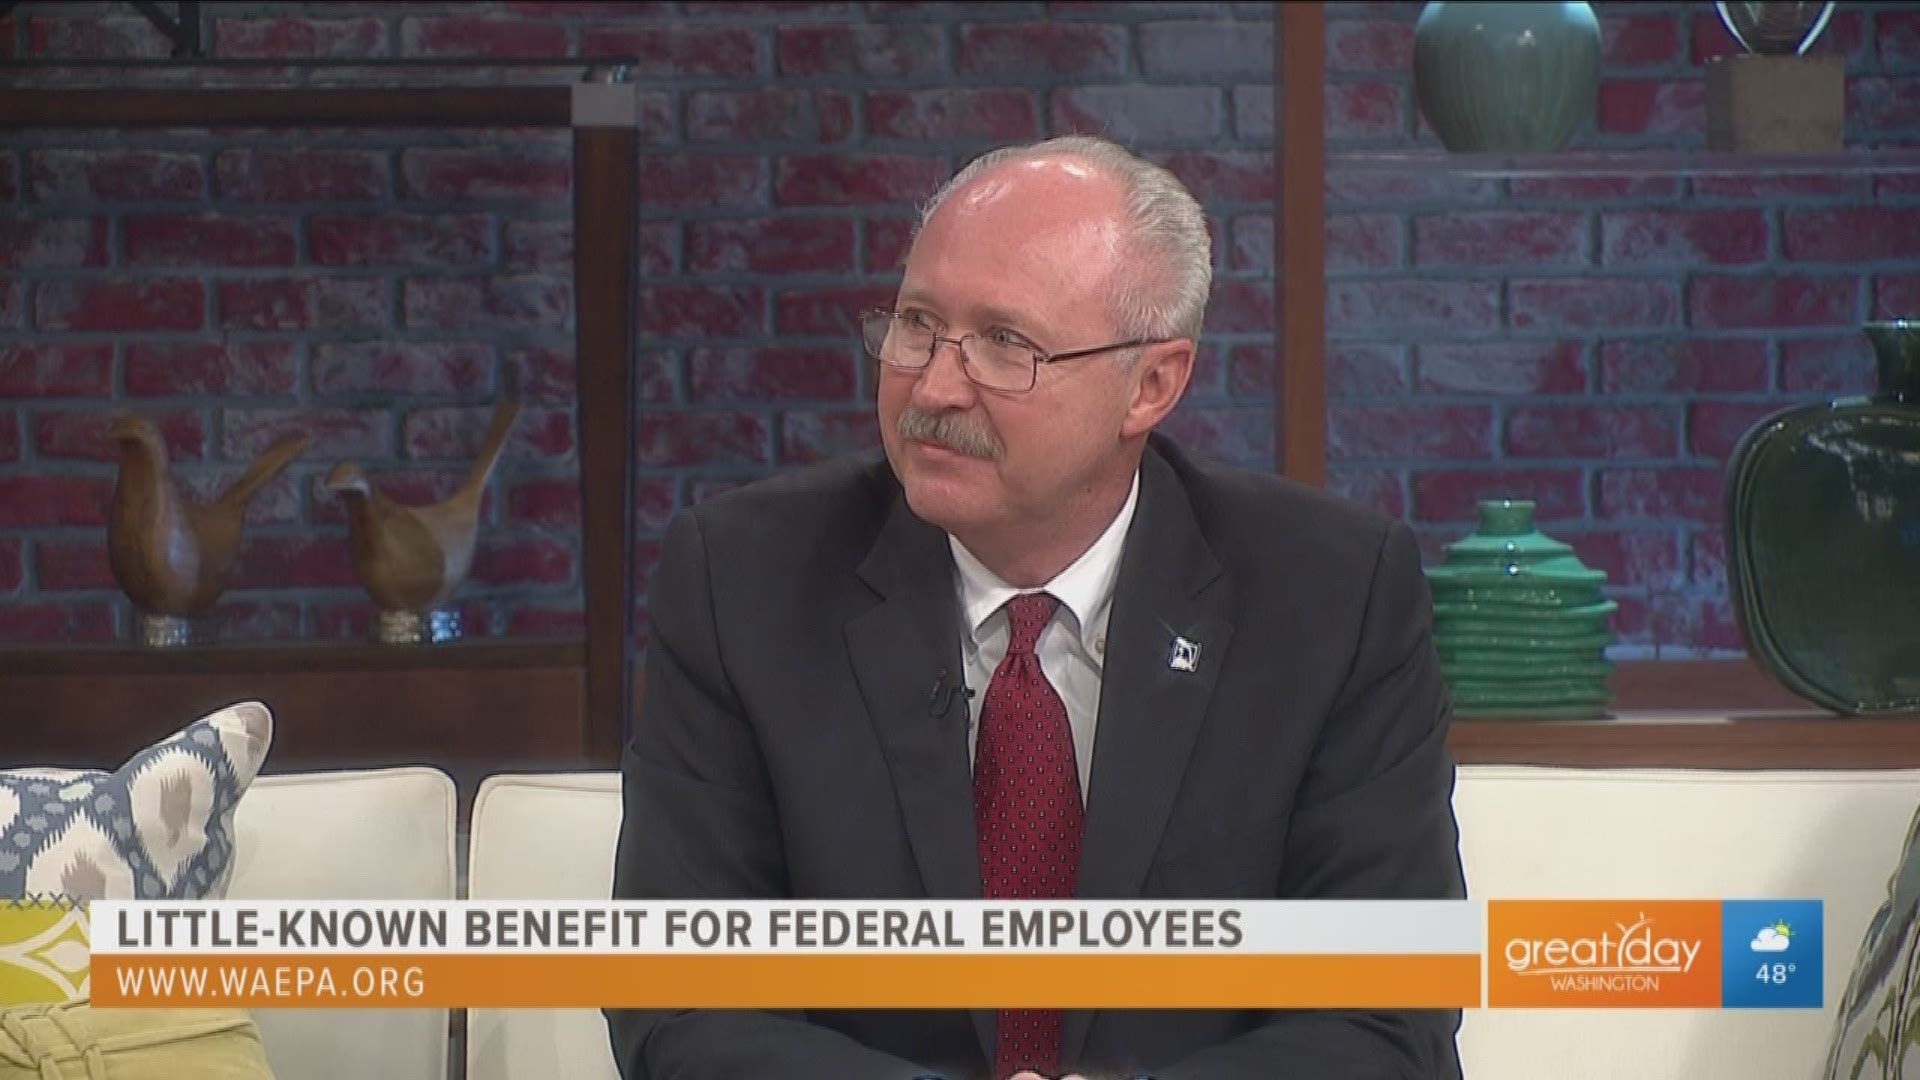 Shane Canfield, CEO of WAEPA chats about the benefits WAEPA provides for federal employees. This segment was sponsored by WAEPA.